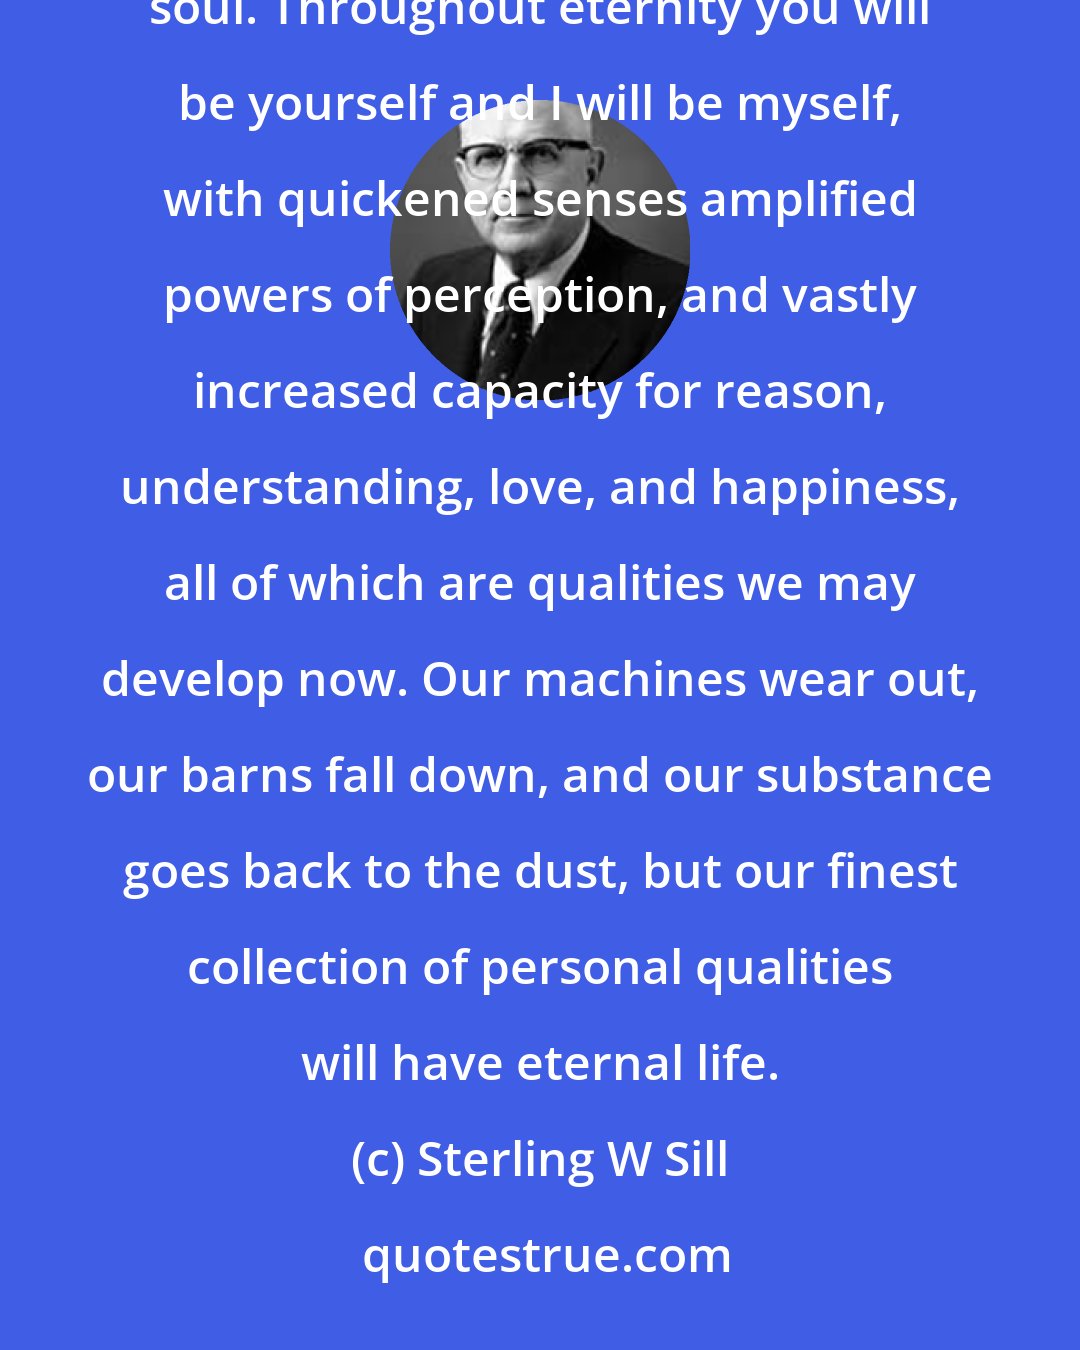 Sterling W Sill: The greatest of all our human concepts is the immortality of the personality and the eternal glory of the human soul. Throughout eternity you will be yourself and I will be myself, with quickened senses amplified powers of perception, and vastly increased capacity for reason, understanding, love, and happiness, all of which are qualities we may develop now. Our machines wear out, our barns fall down, and our substance goes back to the dust, but our finest collection of personal qualities will have eternal life.